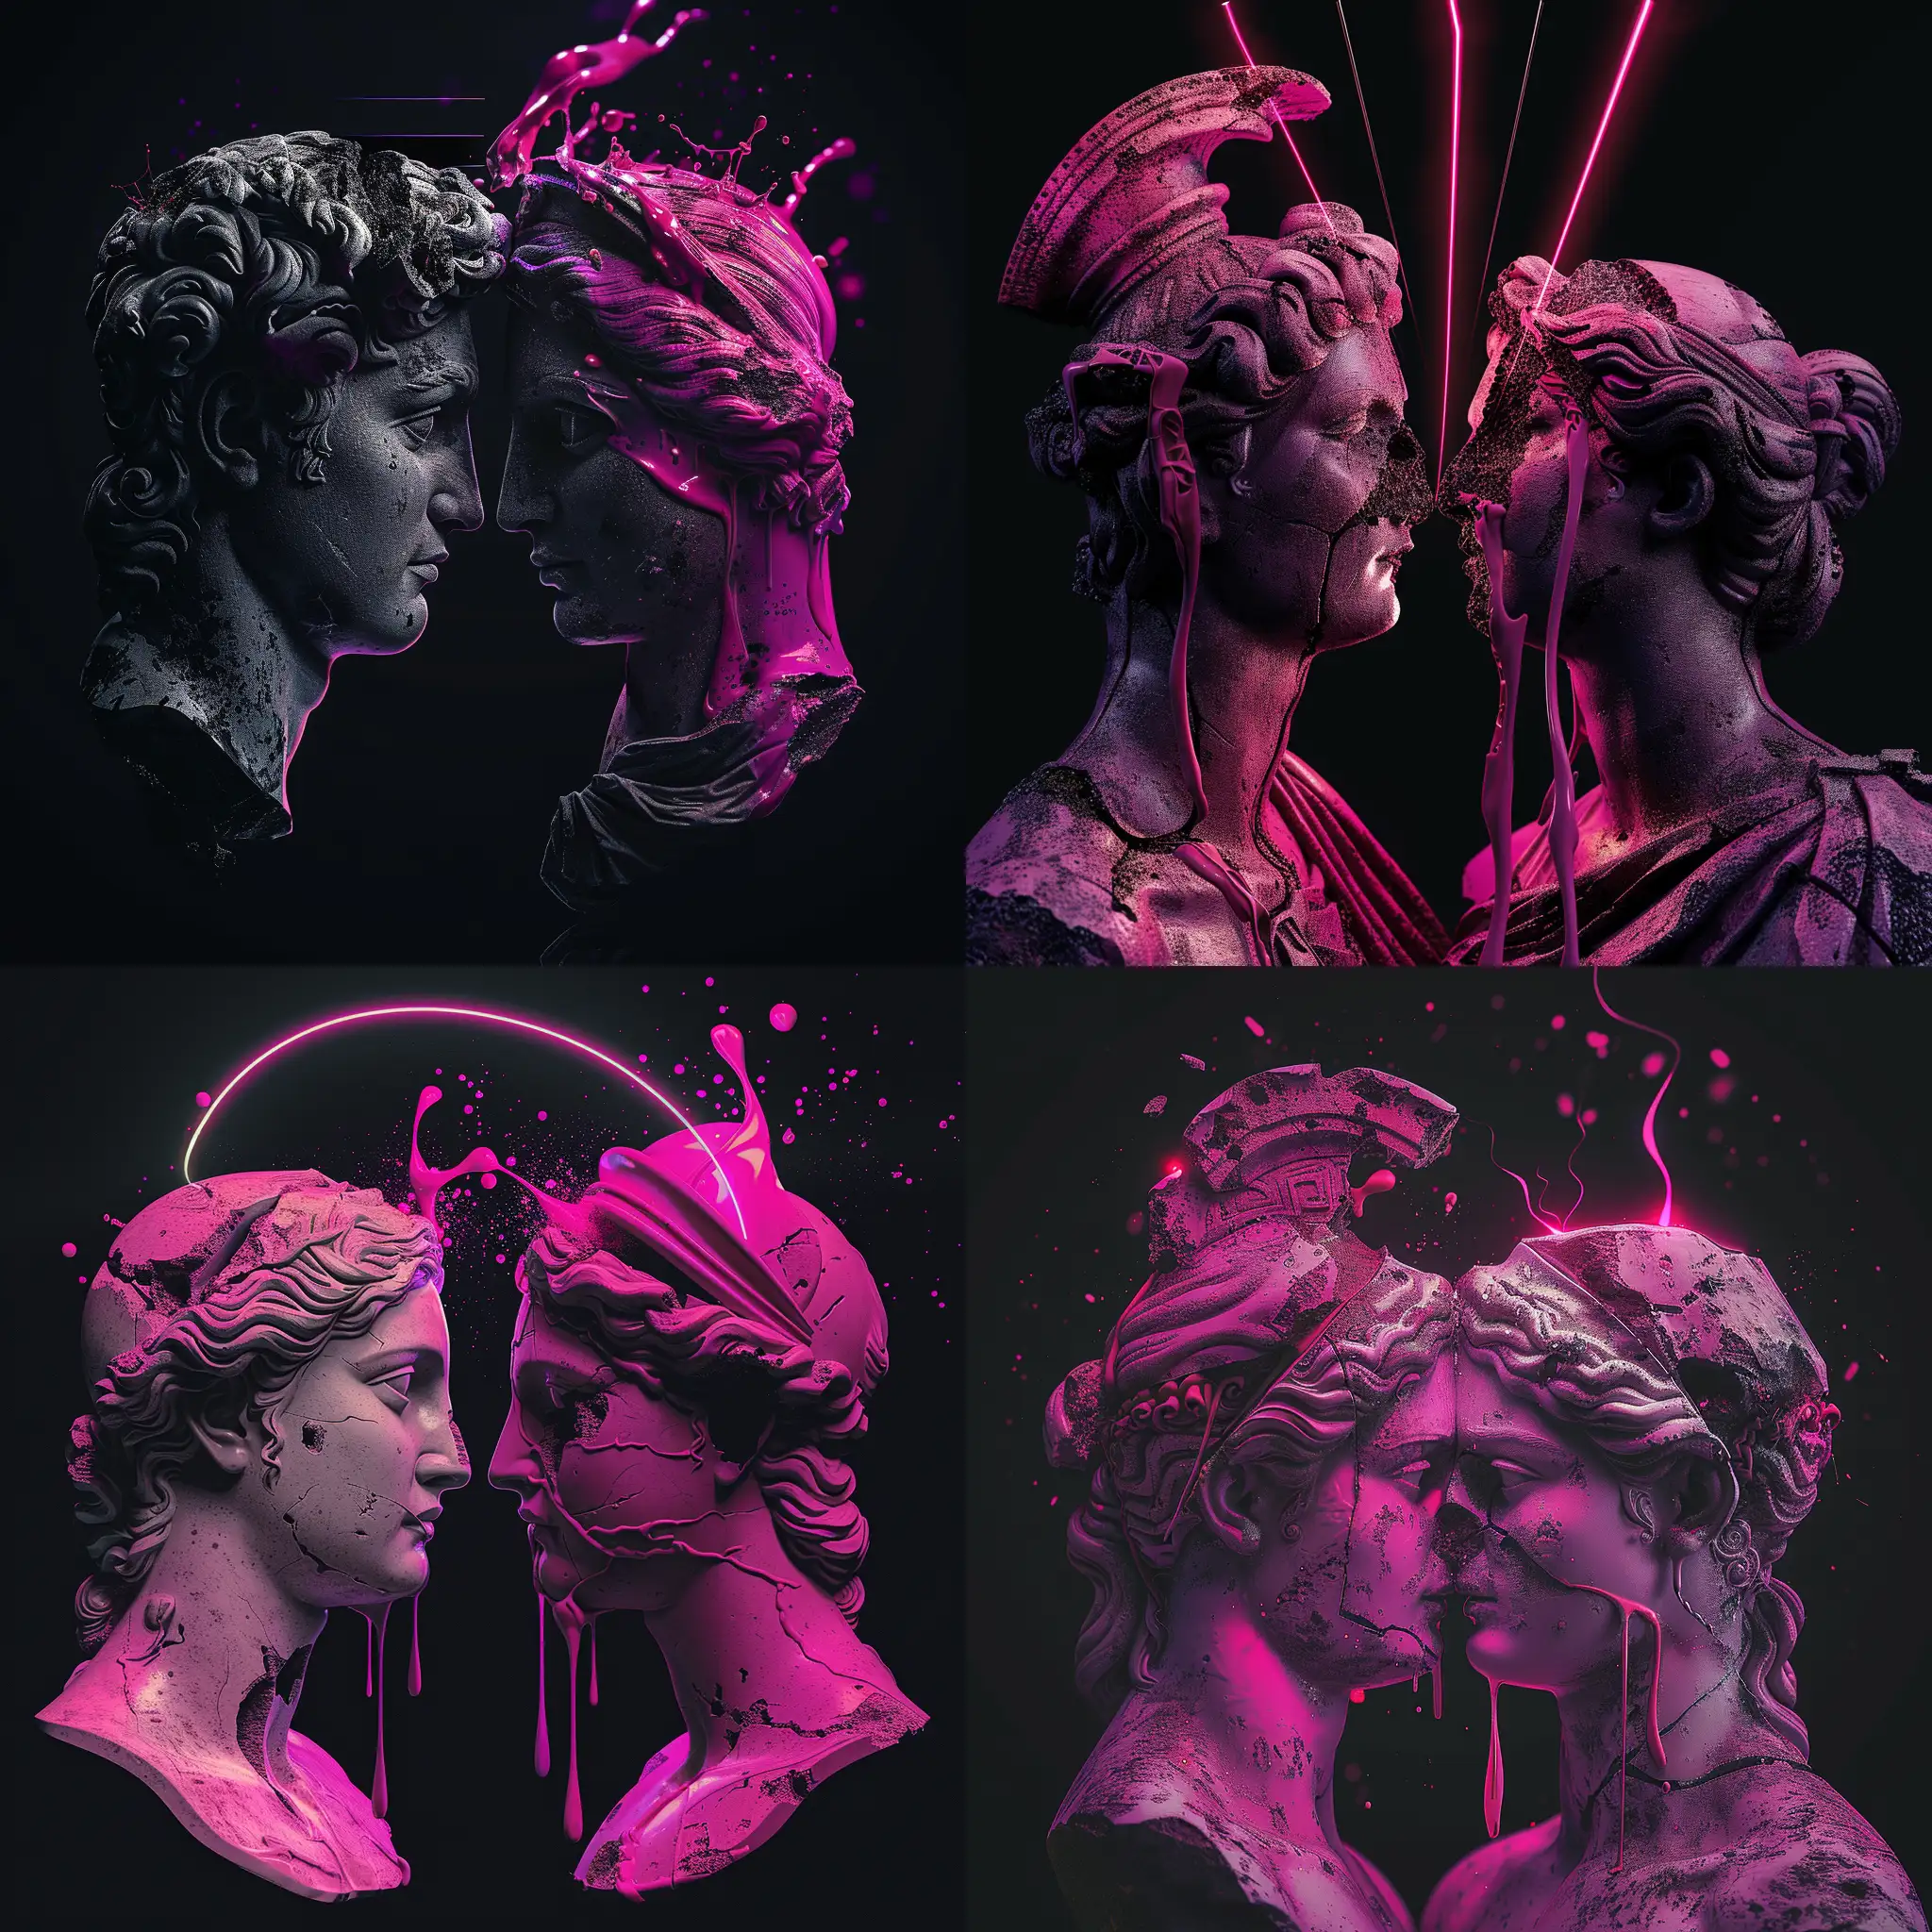  a romantic Greek statues face to face of a man and woman with magenta colour, dark background,liquid magenda on head like venom liquid fighting from laser lights behind and front of the heads , black background,hd, ready for music cover
